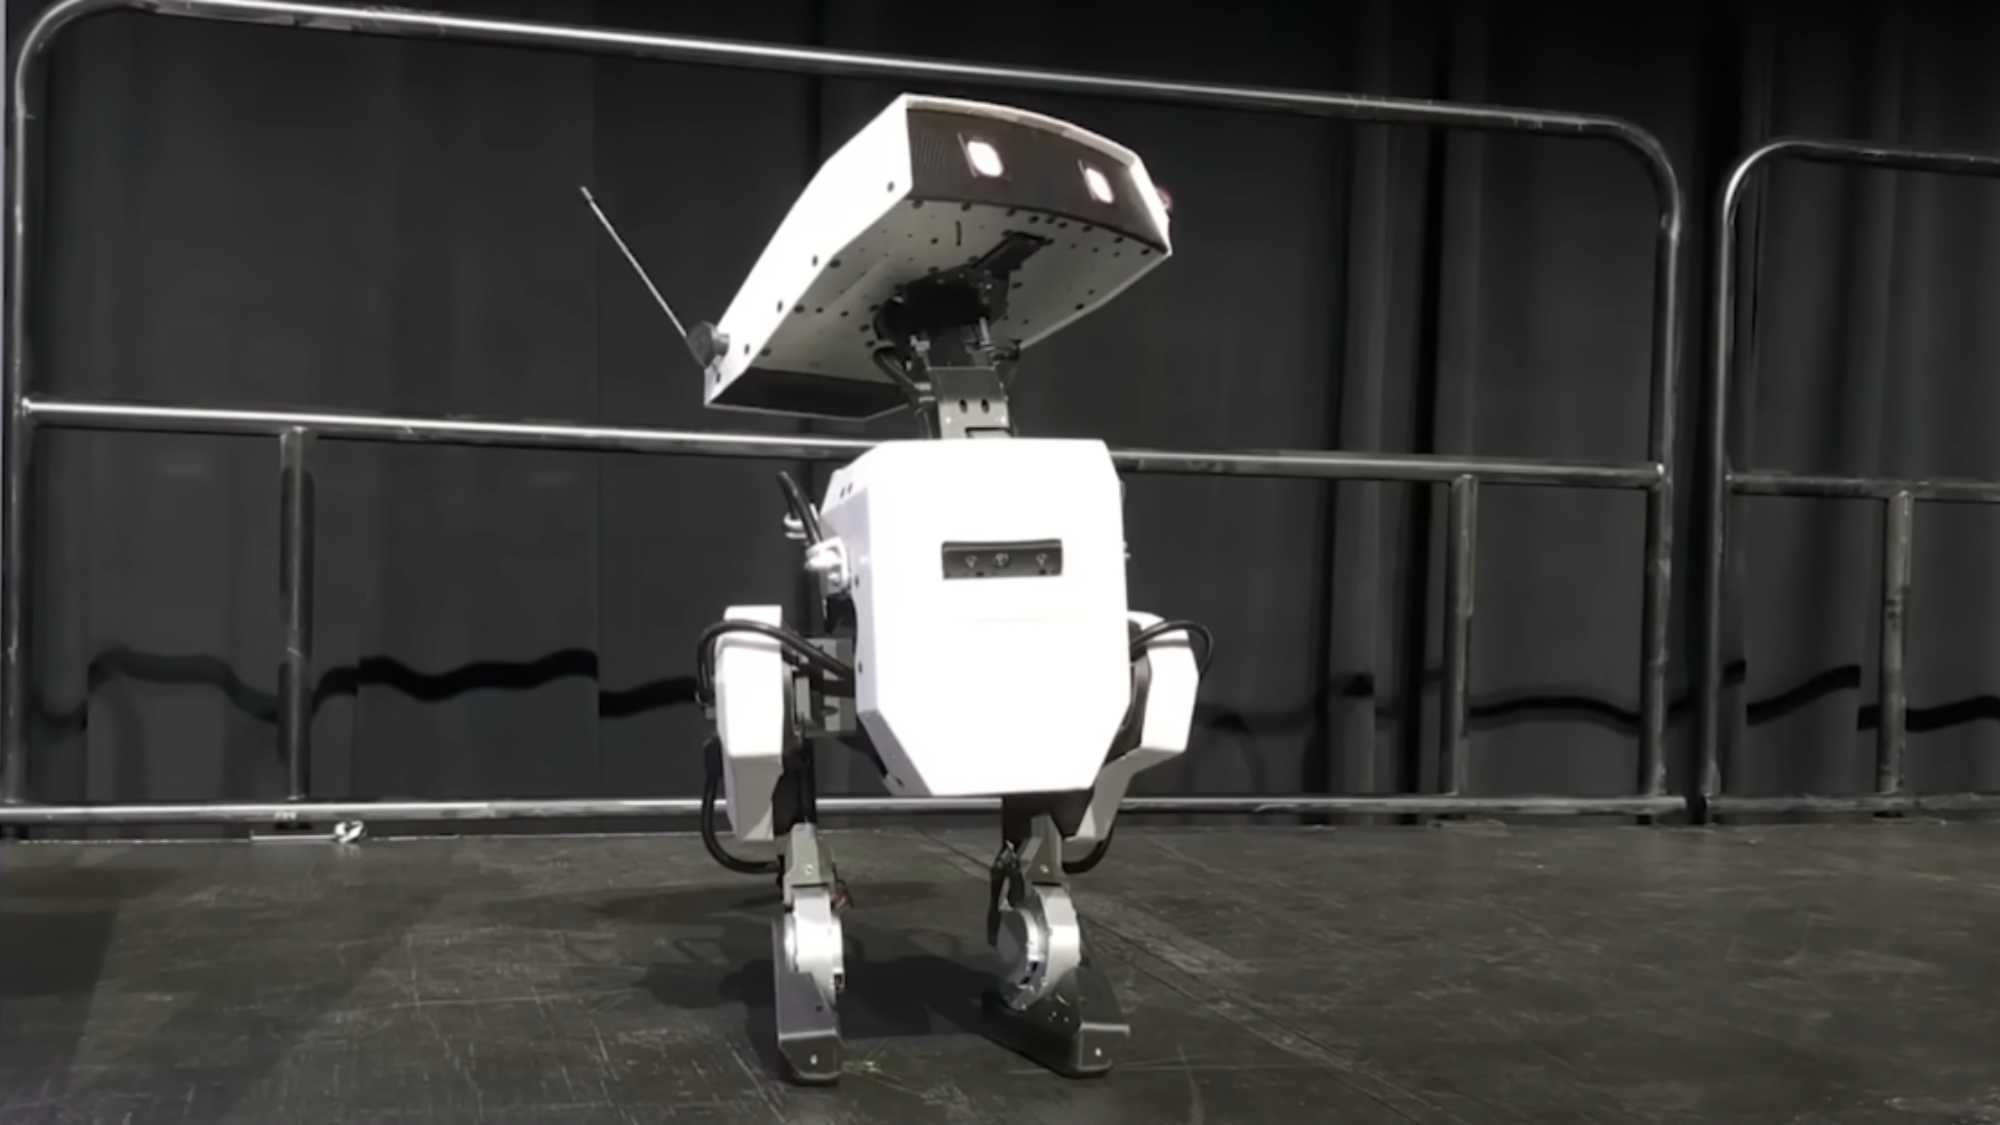 BEAR - ROBOTS: Your Guide to the World of Robotics